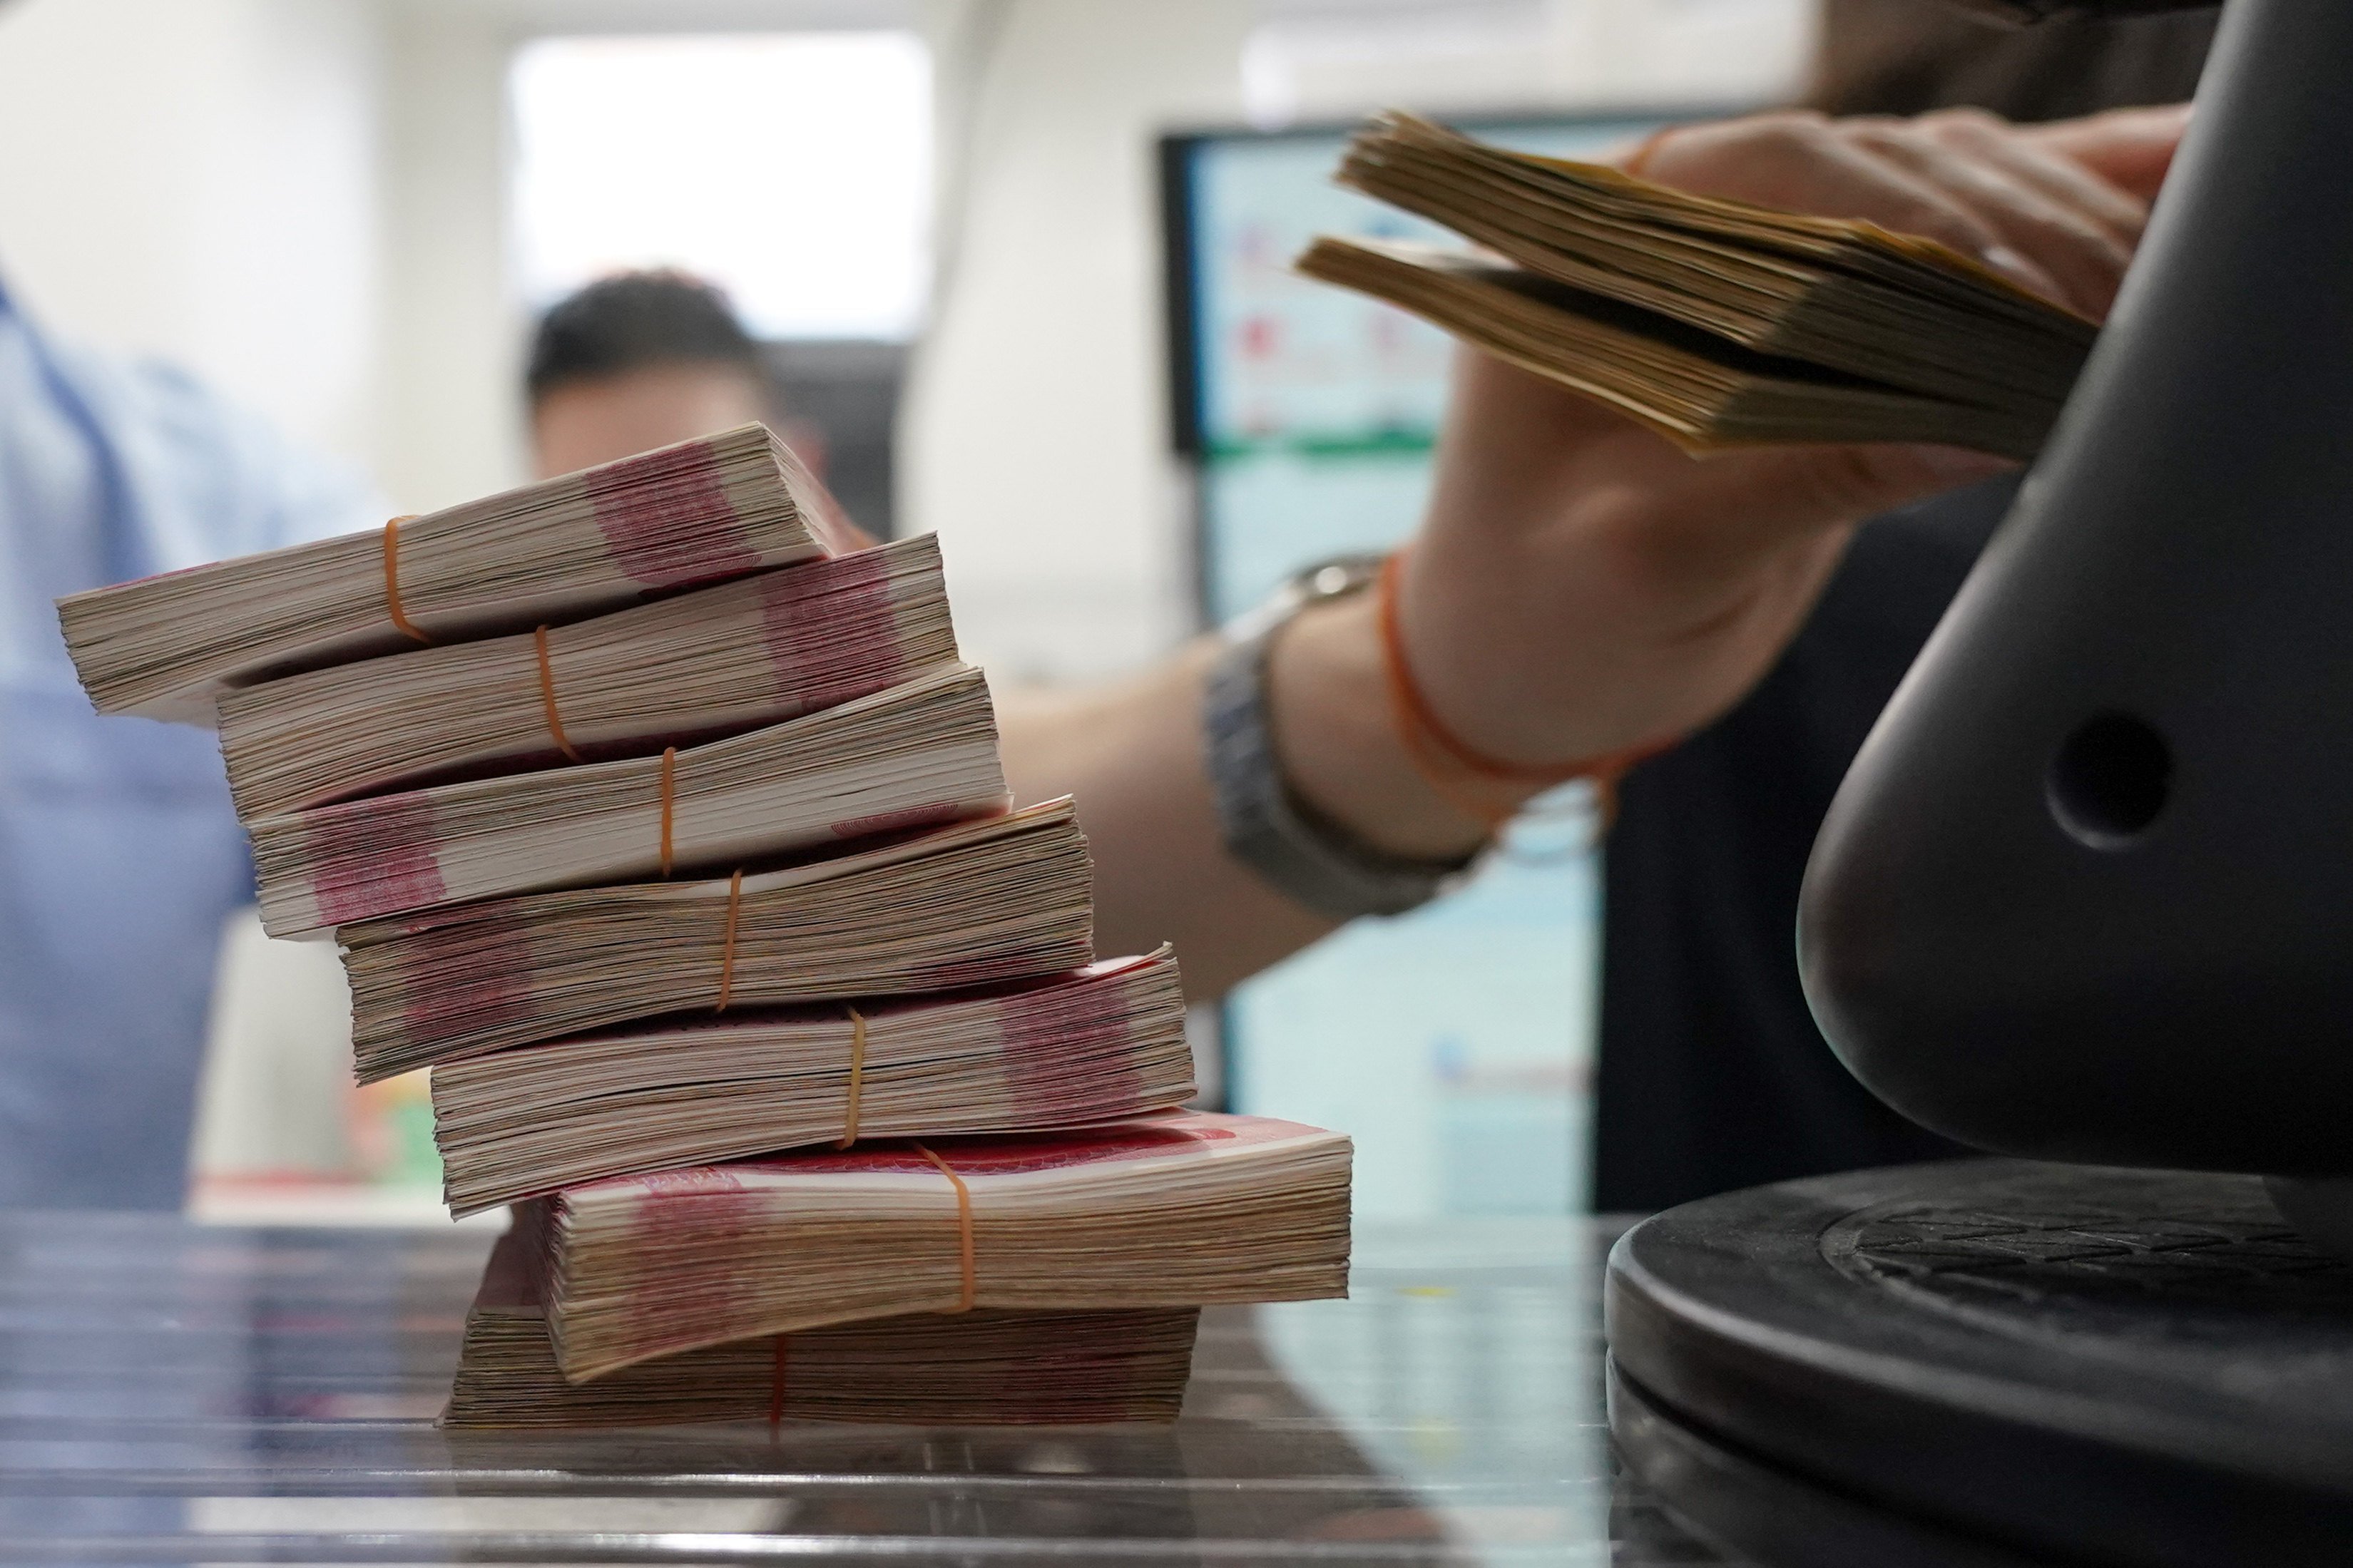 Chinese yuan banknotes are stacked up at a currency exchange in the Shinjuku district of Tokyo, Japan, on June 9. Photo: Bloomberg